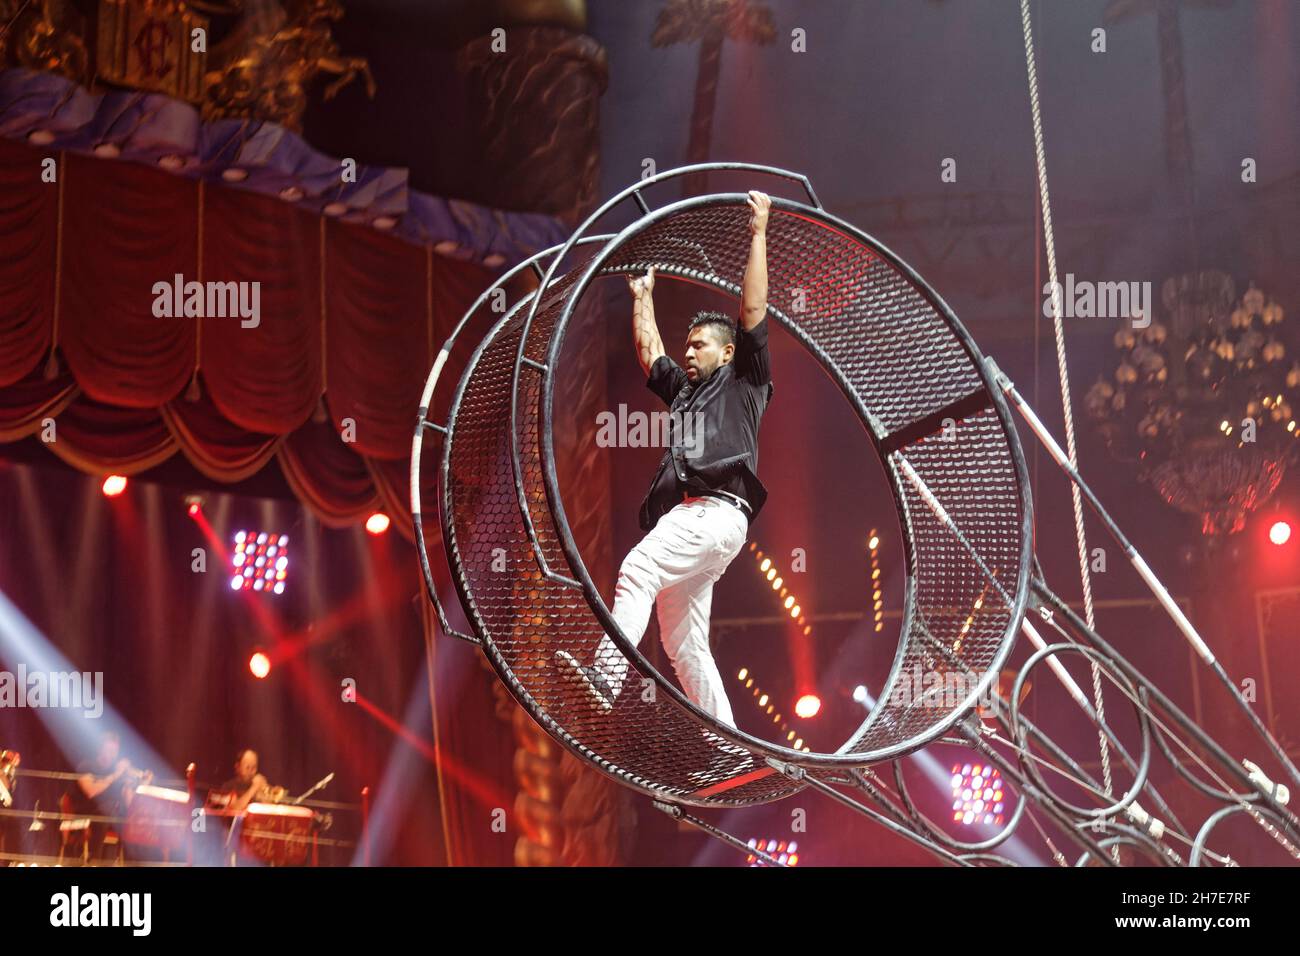 Paris, France. 20th Nov, 2021. The Navas Rudy and Ray and their wheel of death perform during Cirque Bouglione's 'Dingue' show at the Cirque d'Hiver. Stock Photo